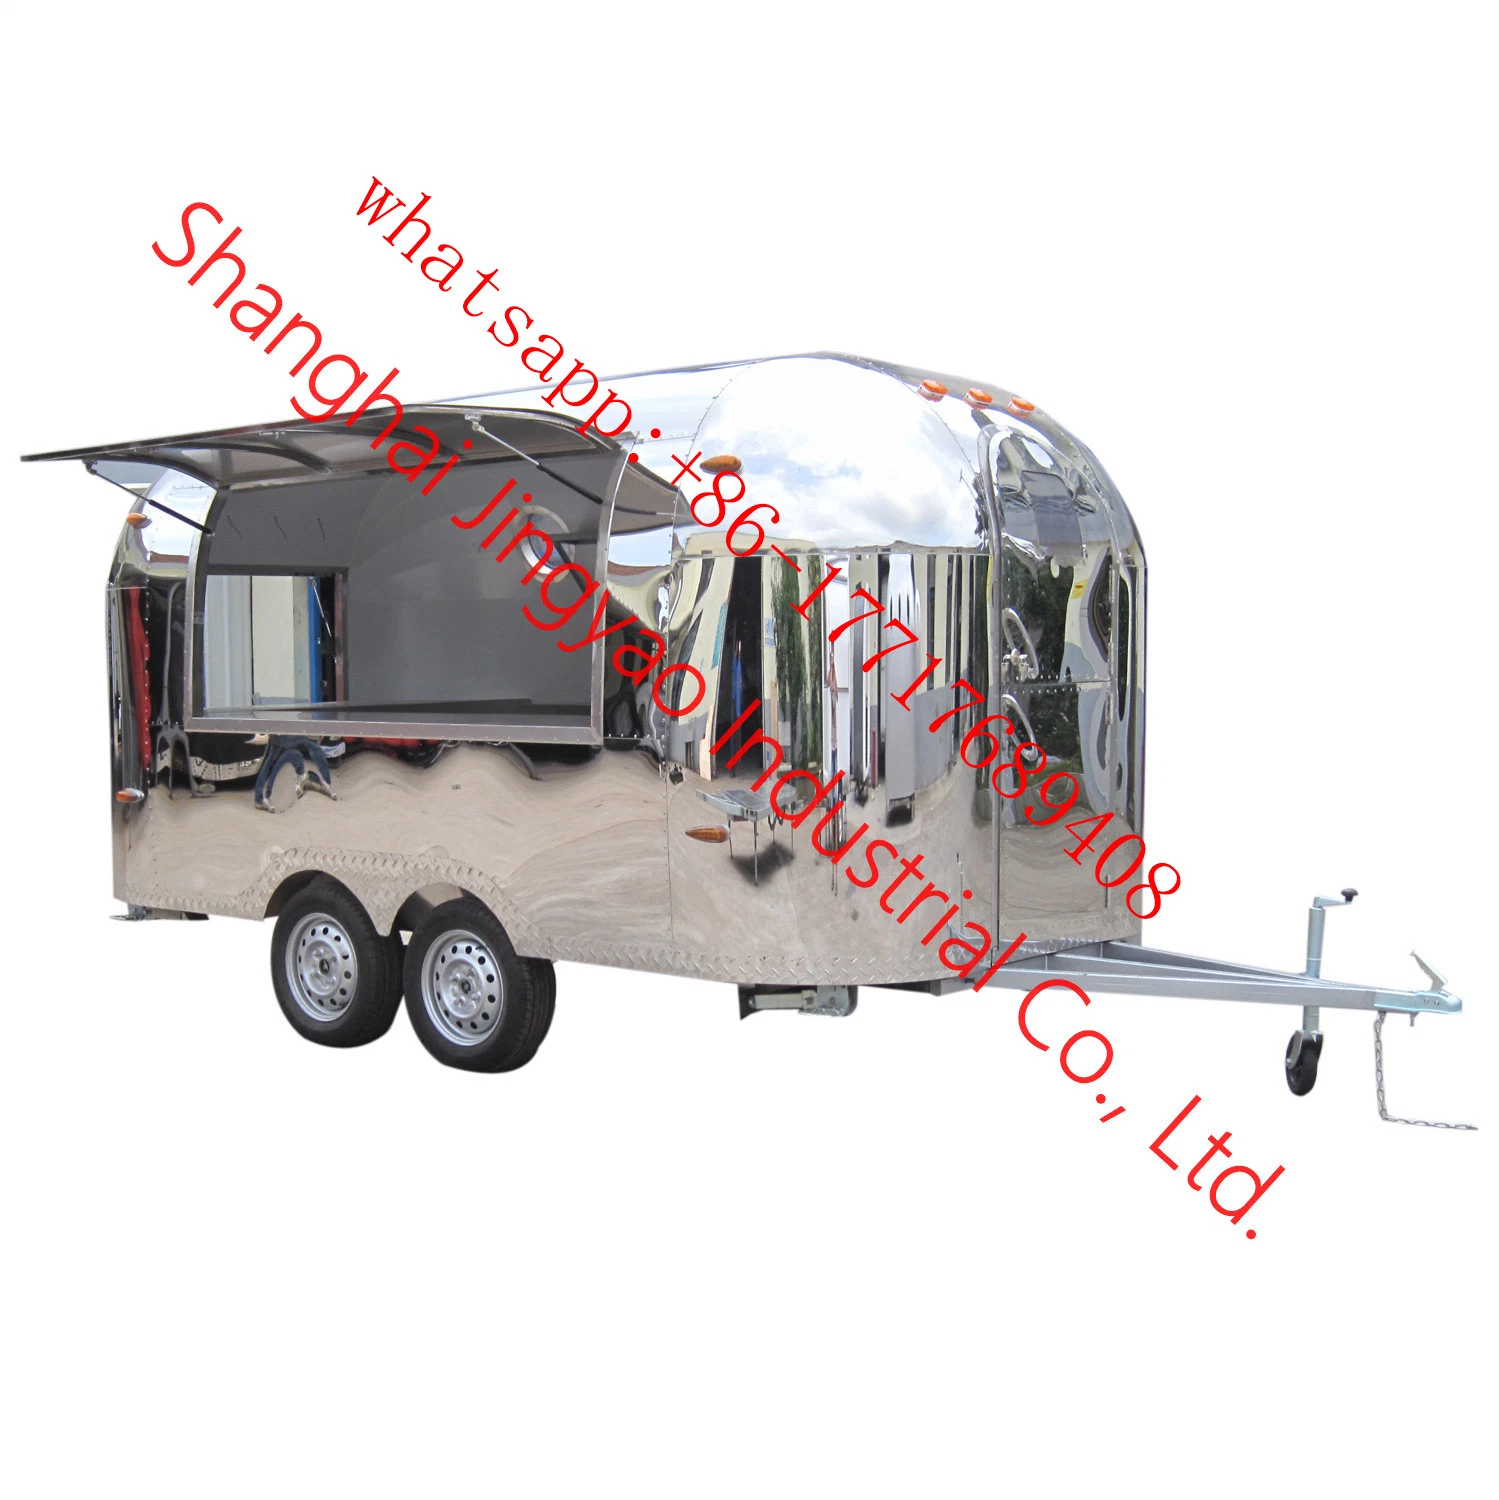 High Quality Customized Color Stainless Steel Beach Trolley Mobile Food Cart Vintage Ice Cream Food Truck Fast Food Vending Trailer Food Van Trailer for Sale